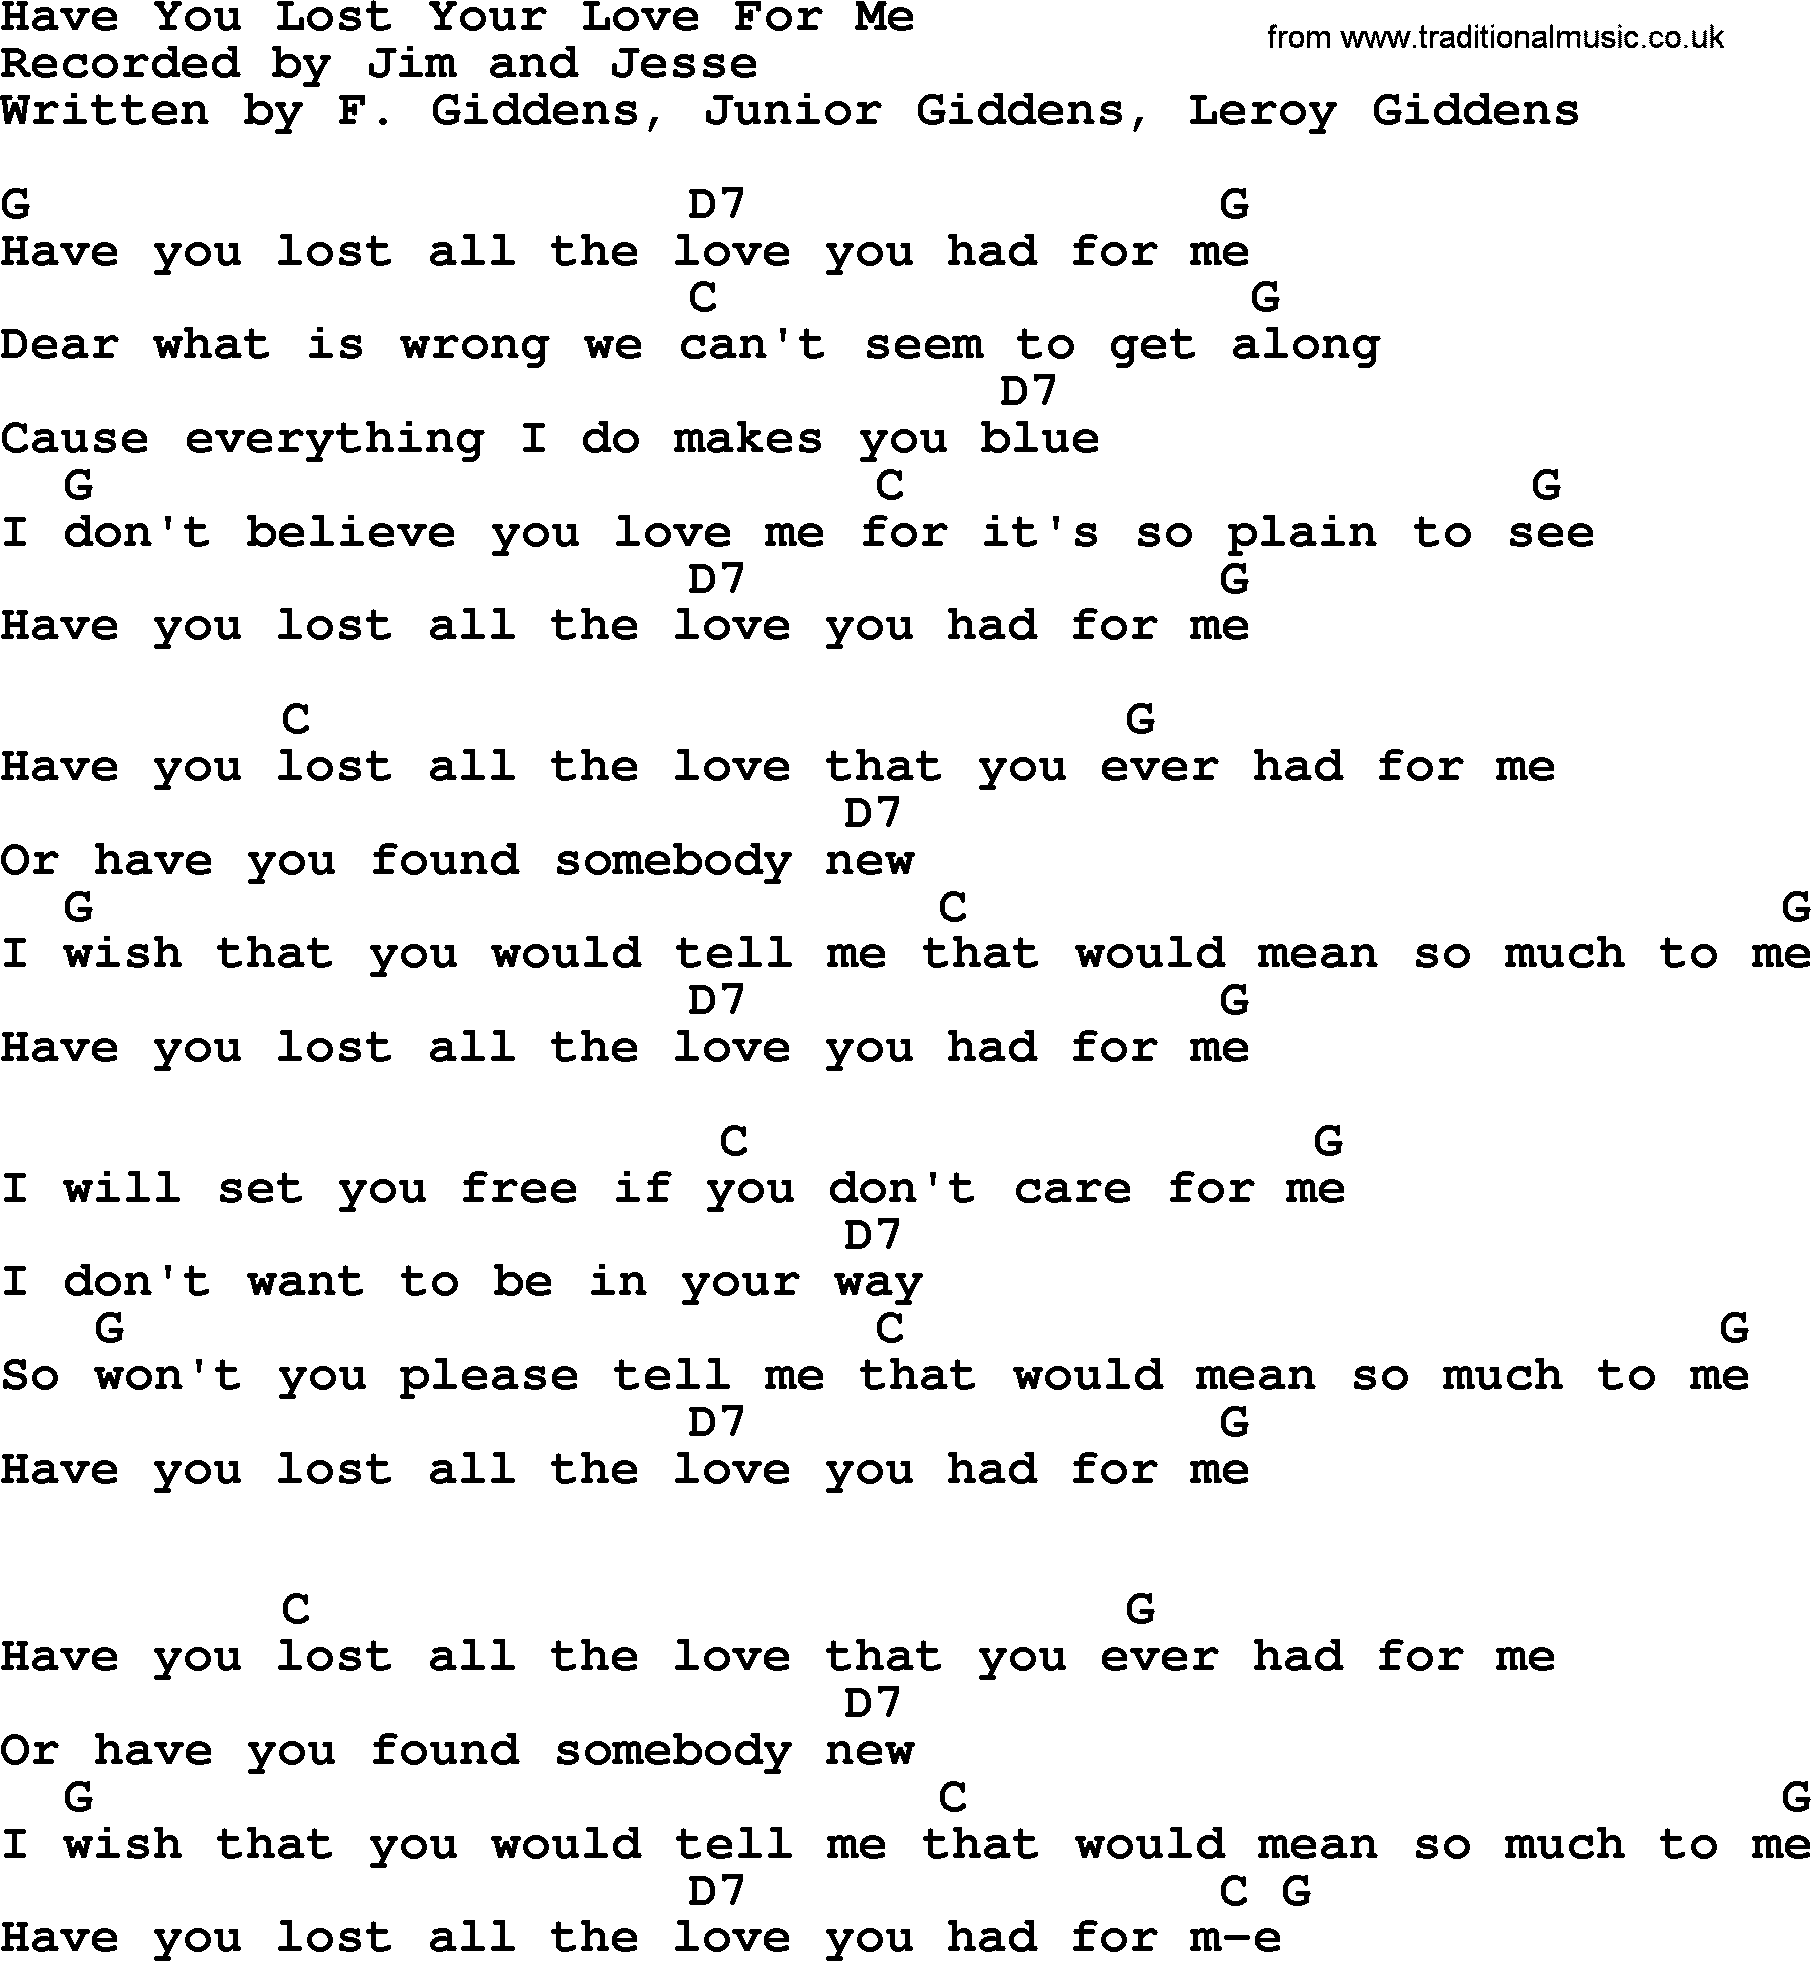 Bluegrass song: Have You Lost Your Love For Me, lyrics and chords